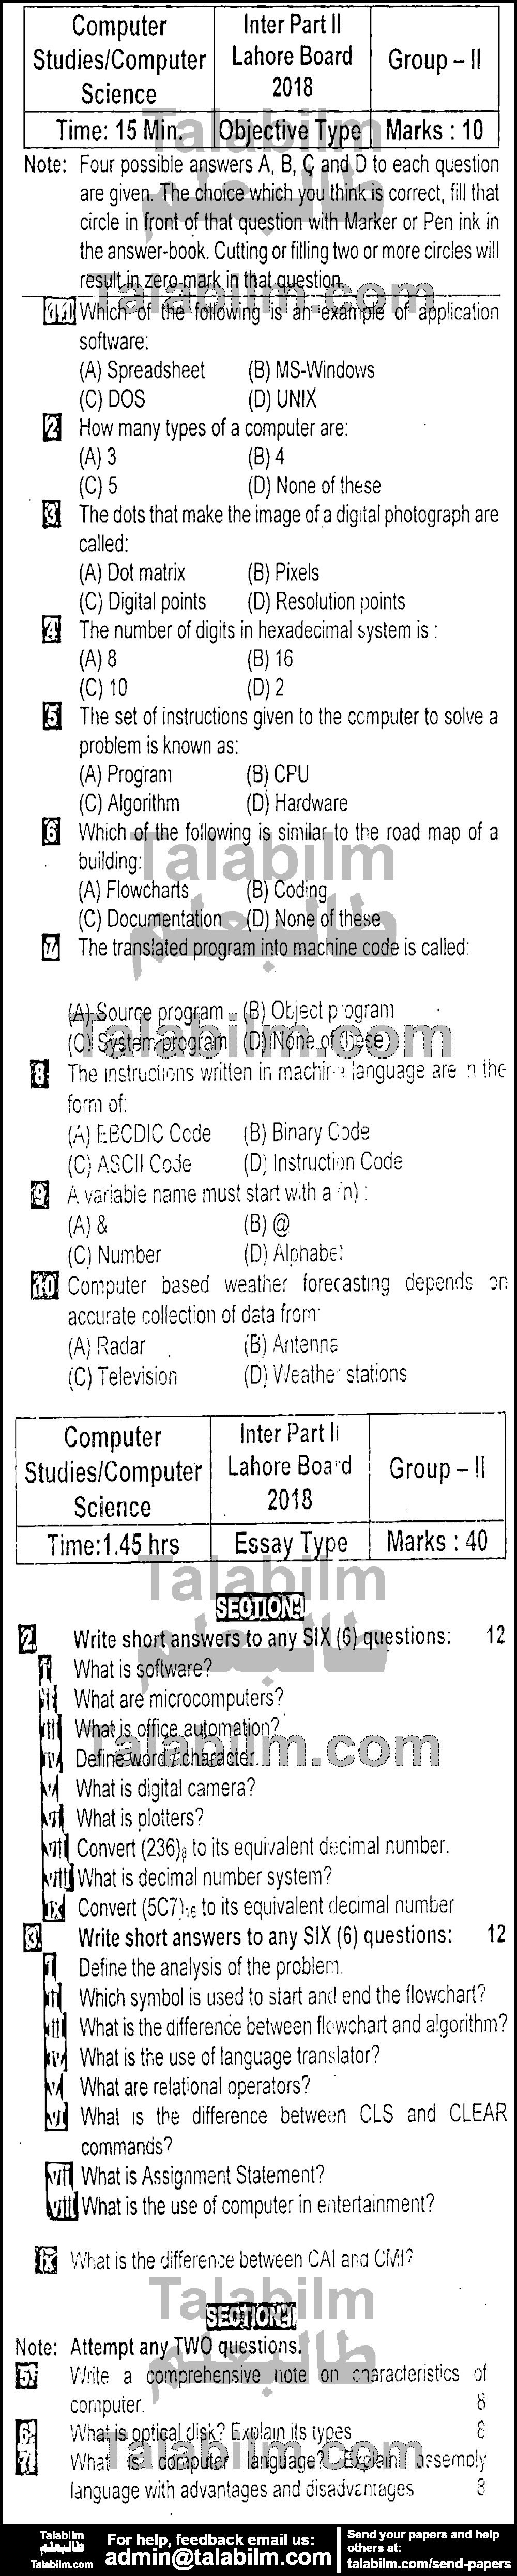 Computer Science 0 past paper for Group-II 2018